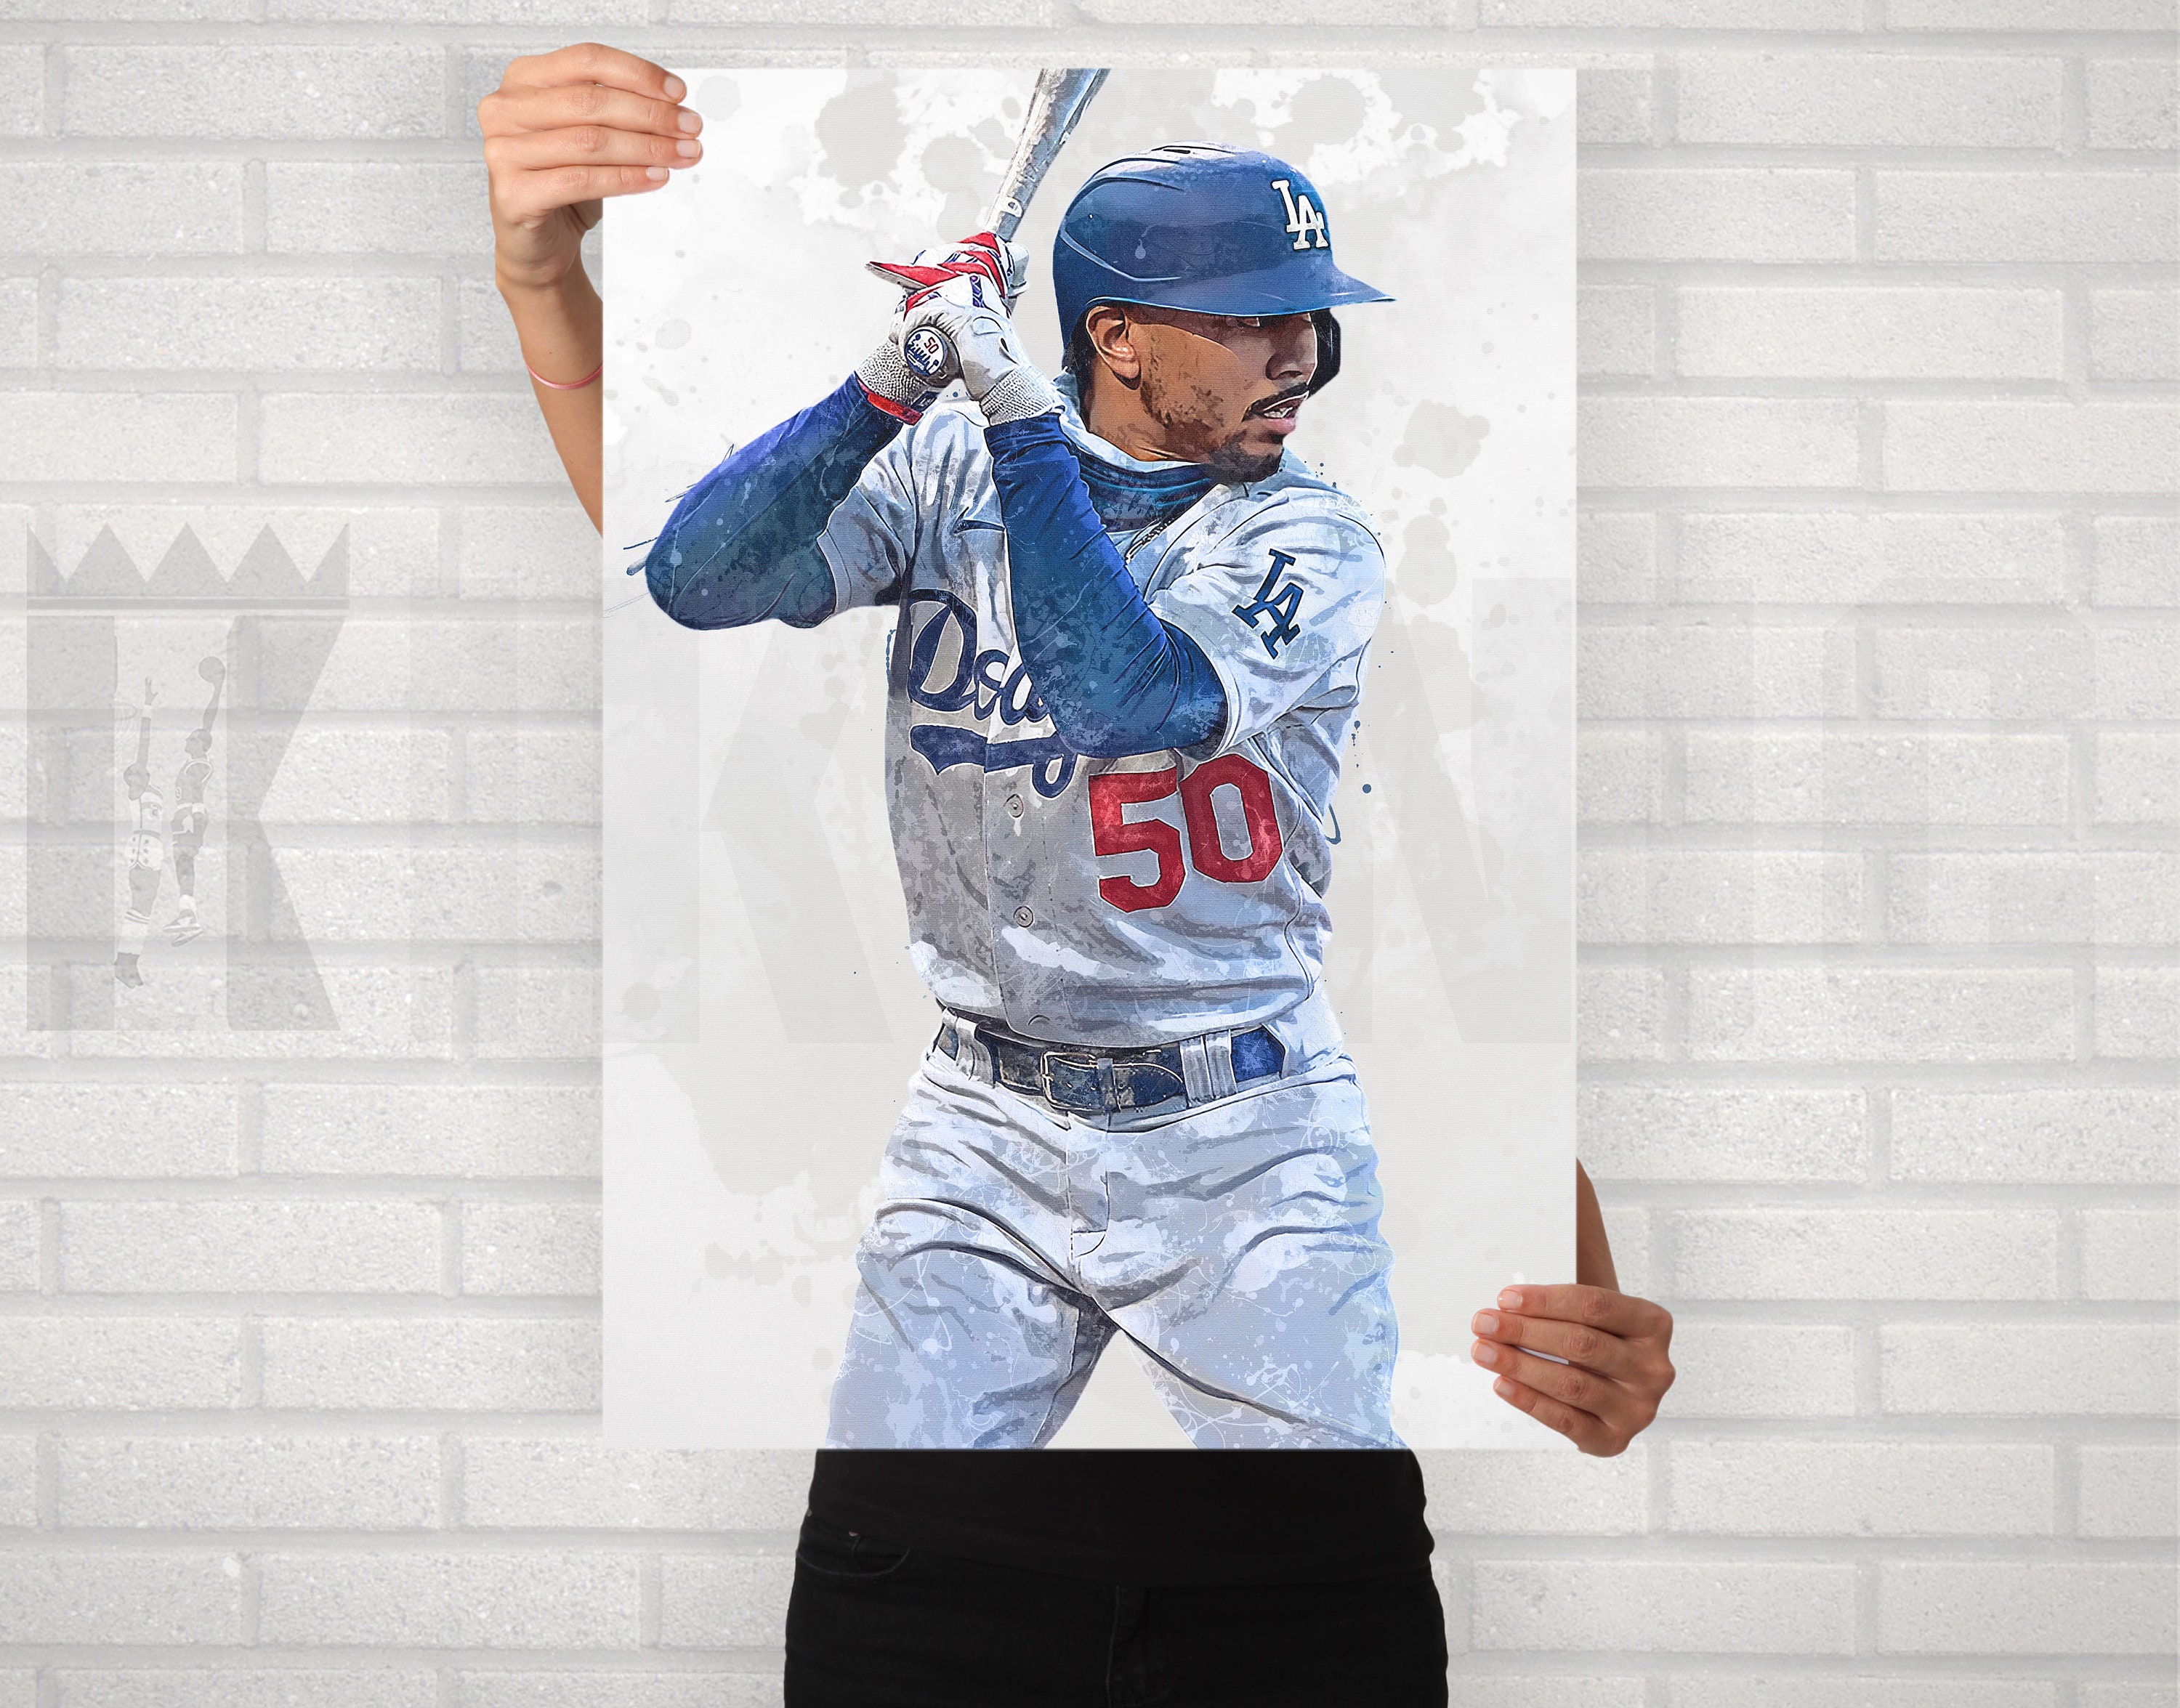 mookie betts 50 Poster for Sale by absolutestudio